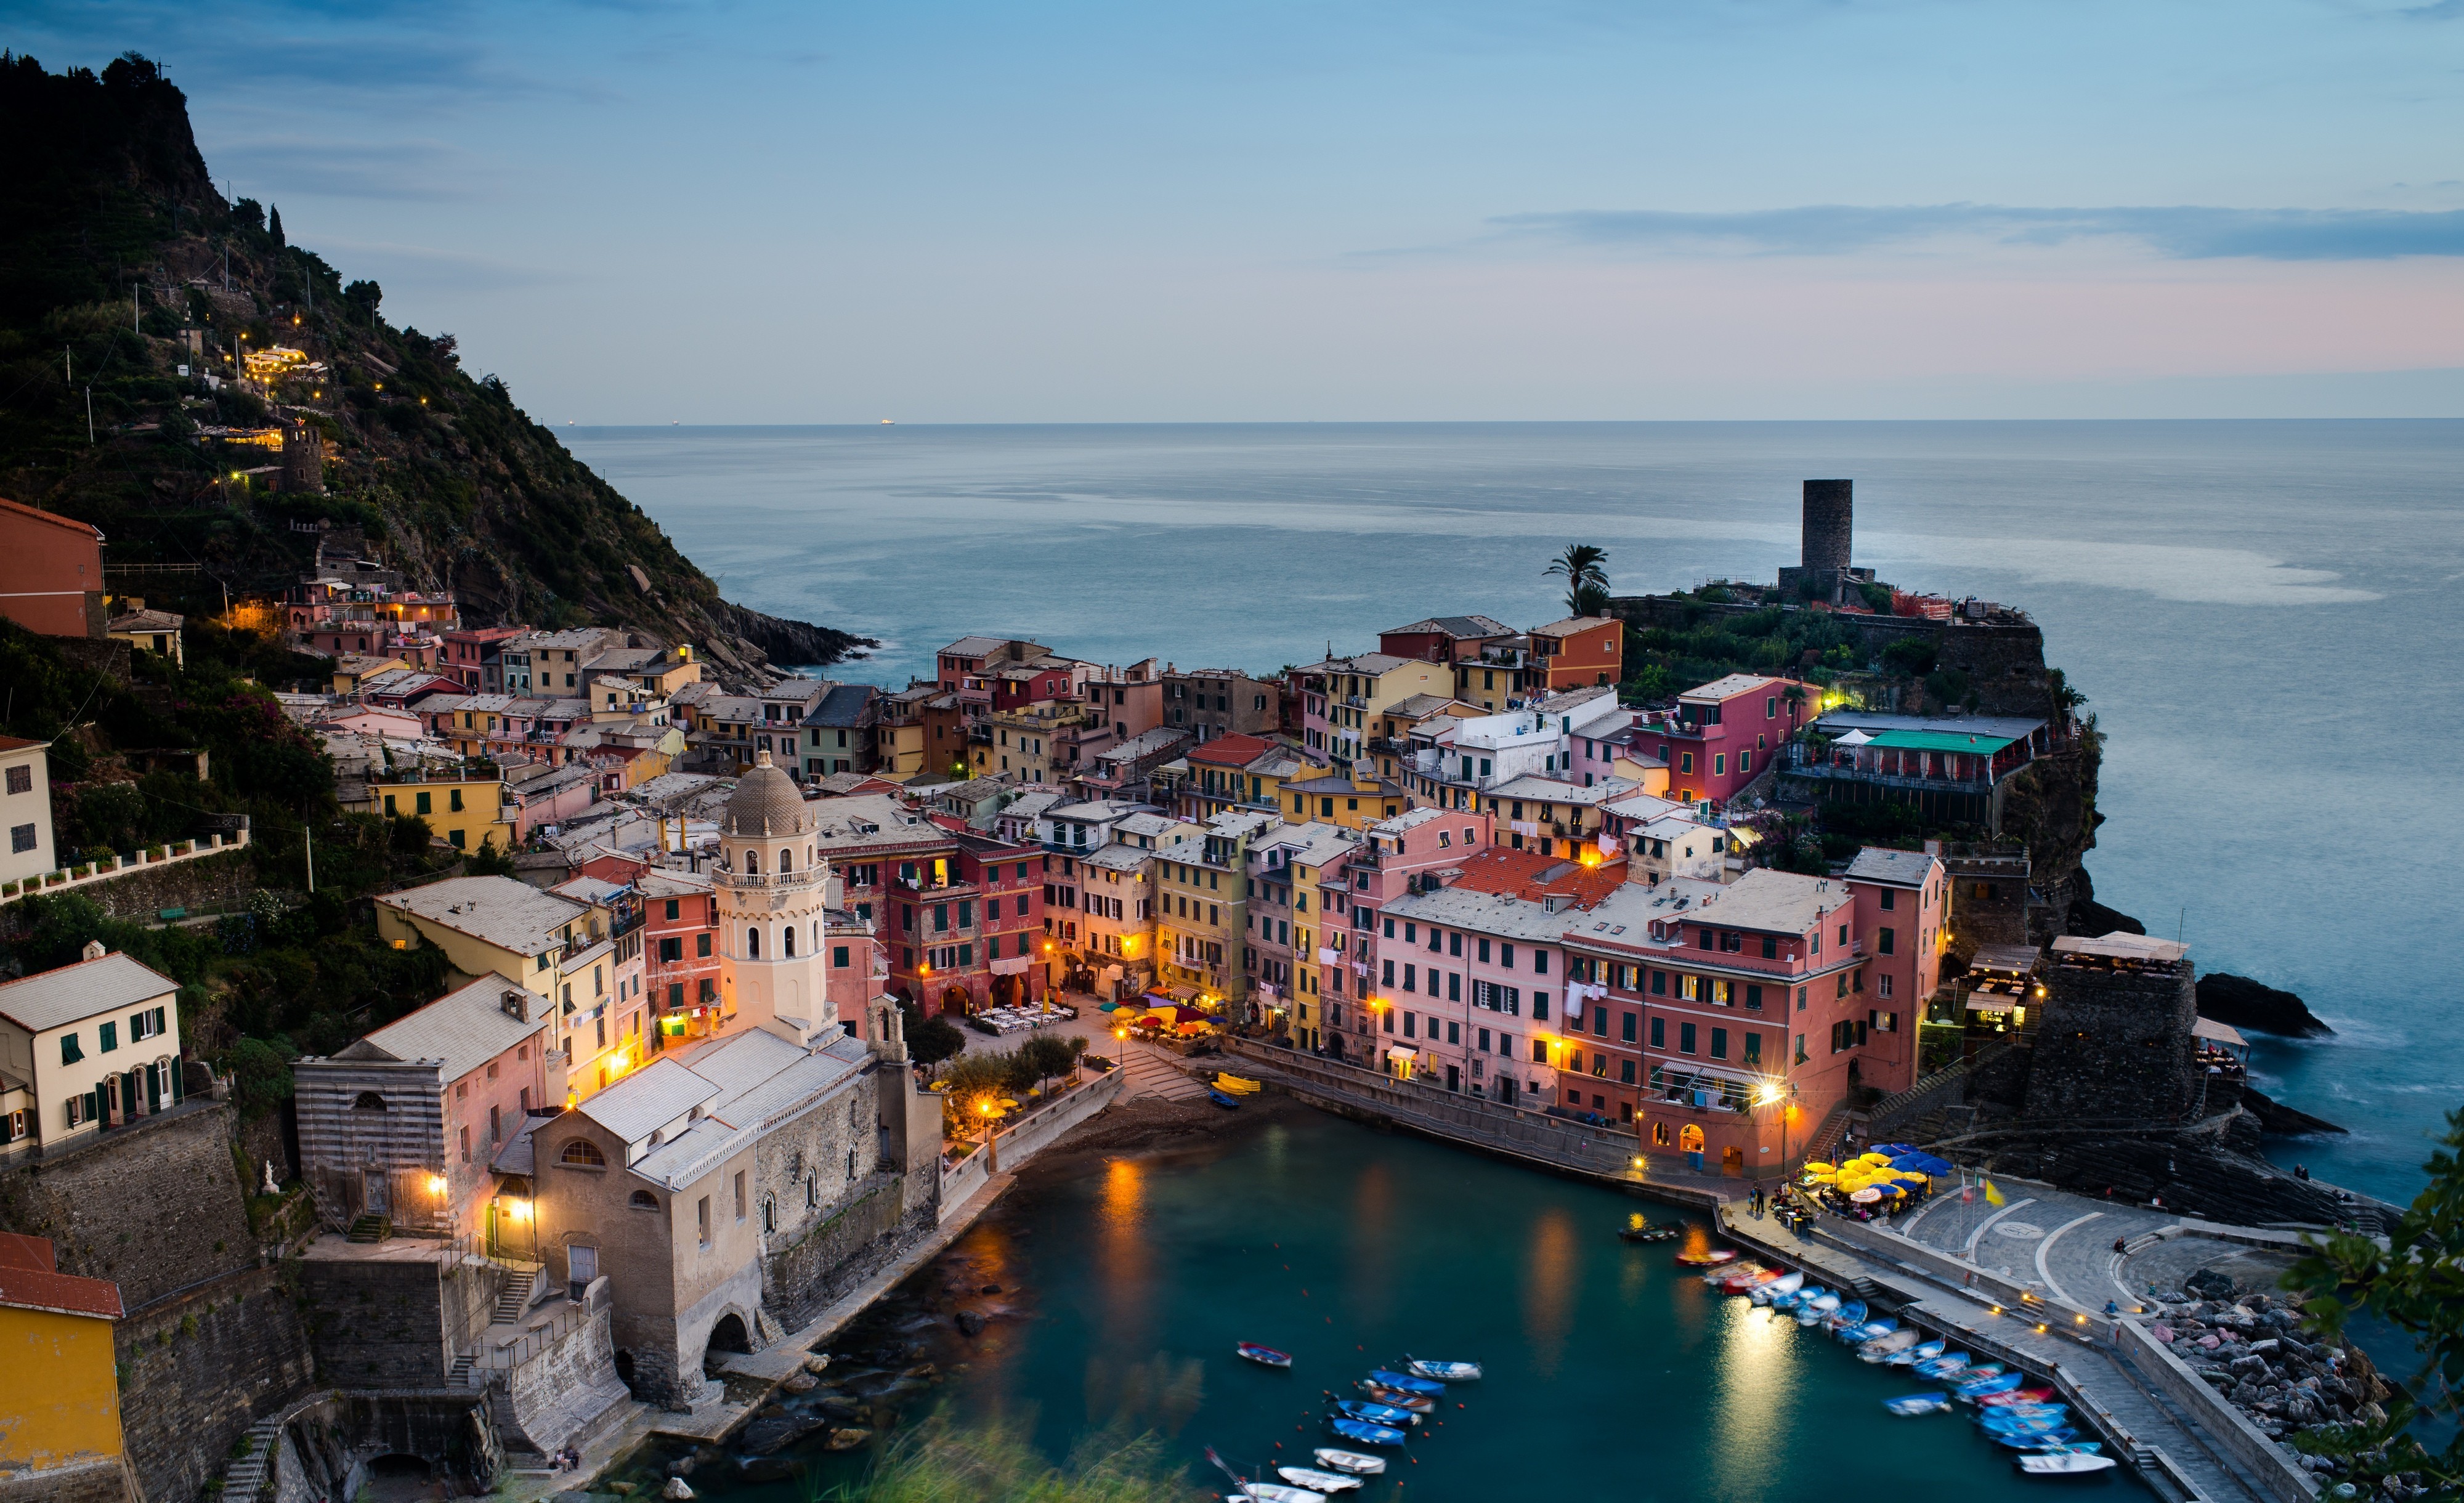 italy, man made, vernazza, cinque terre, liguria, towns High Definition image